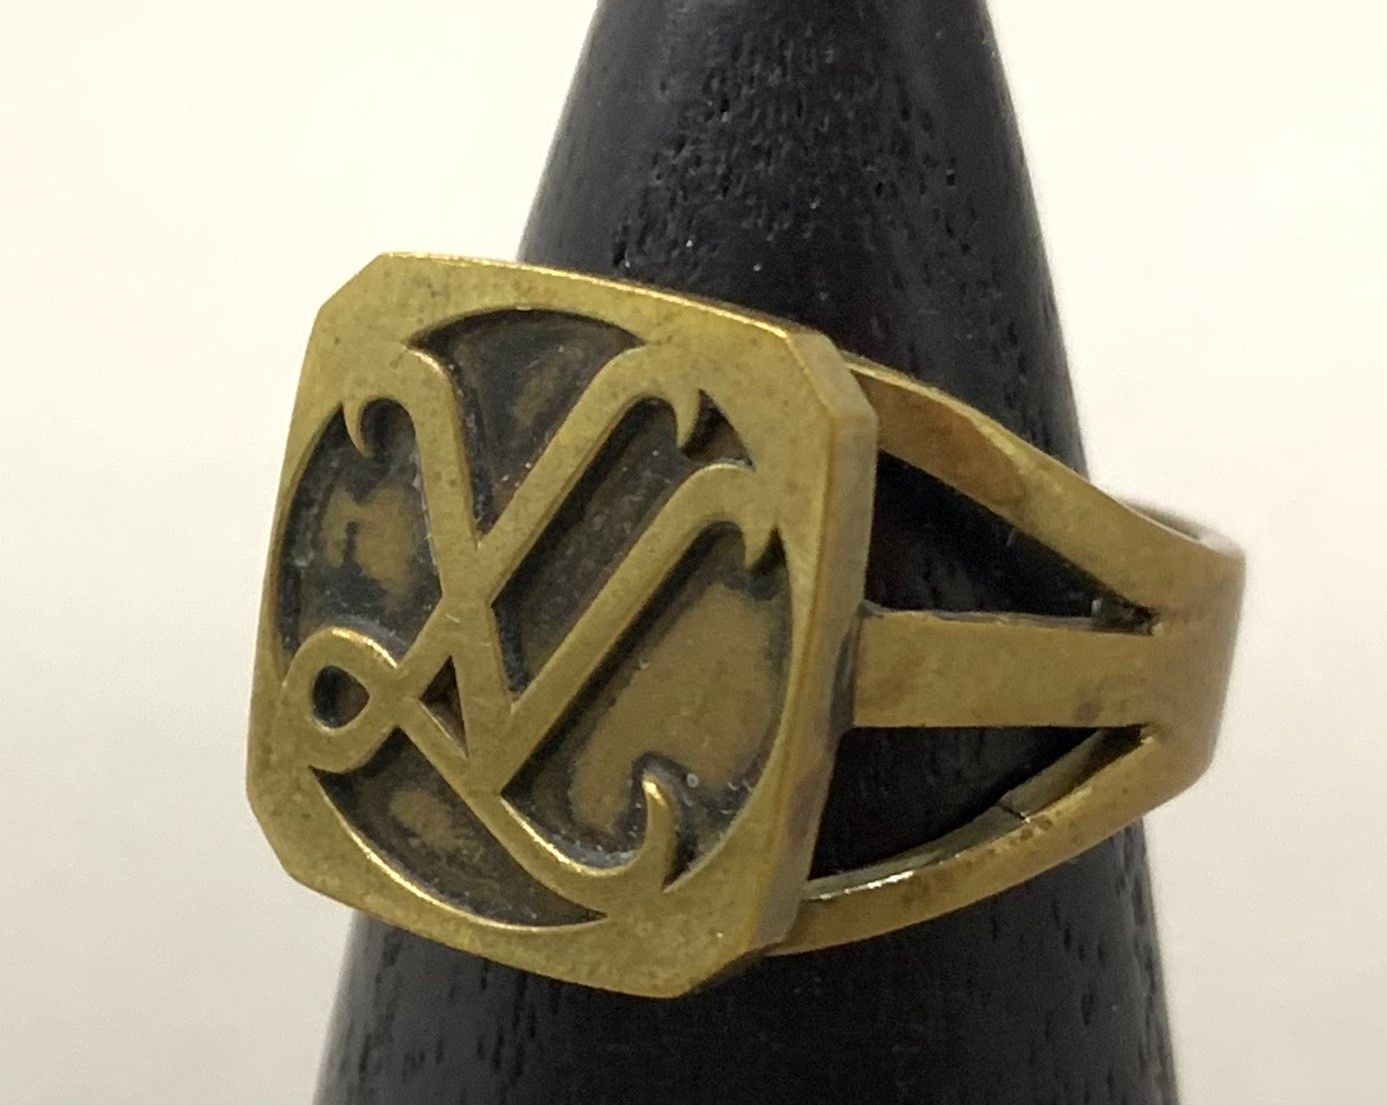 LOUIS VUITTON. Bronze signet ring with the LV monogram o…